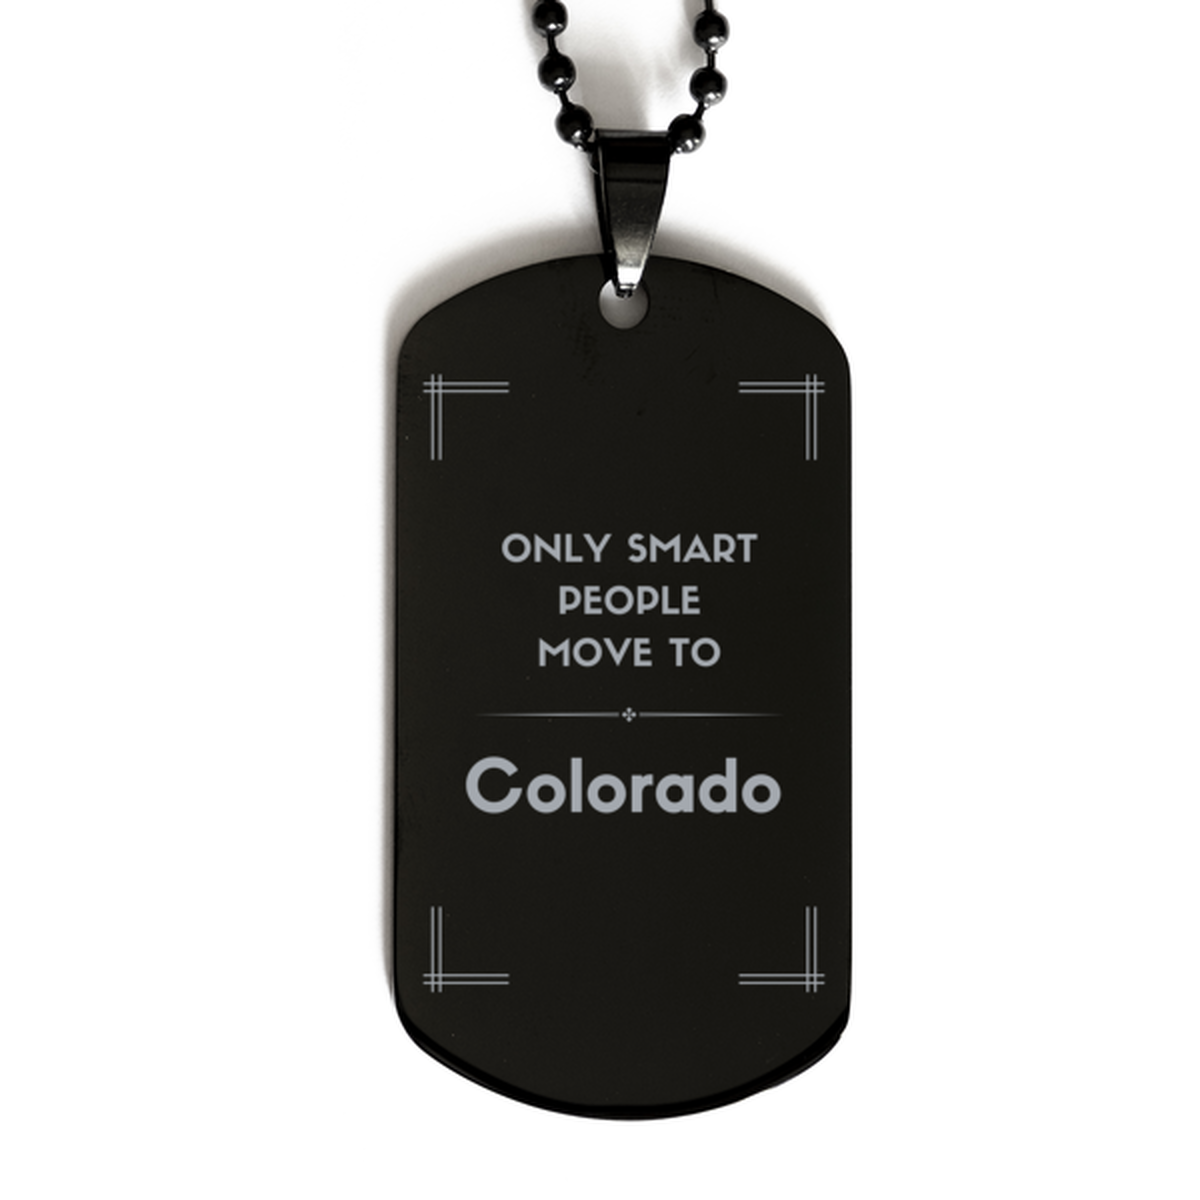 Only smart people move to Colorado Black Dog Tag, Gag Gifts For Colorado, Move to Colorado Gifts for Friends Coworker Funny Saying Quote